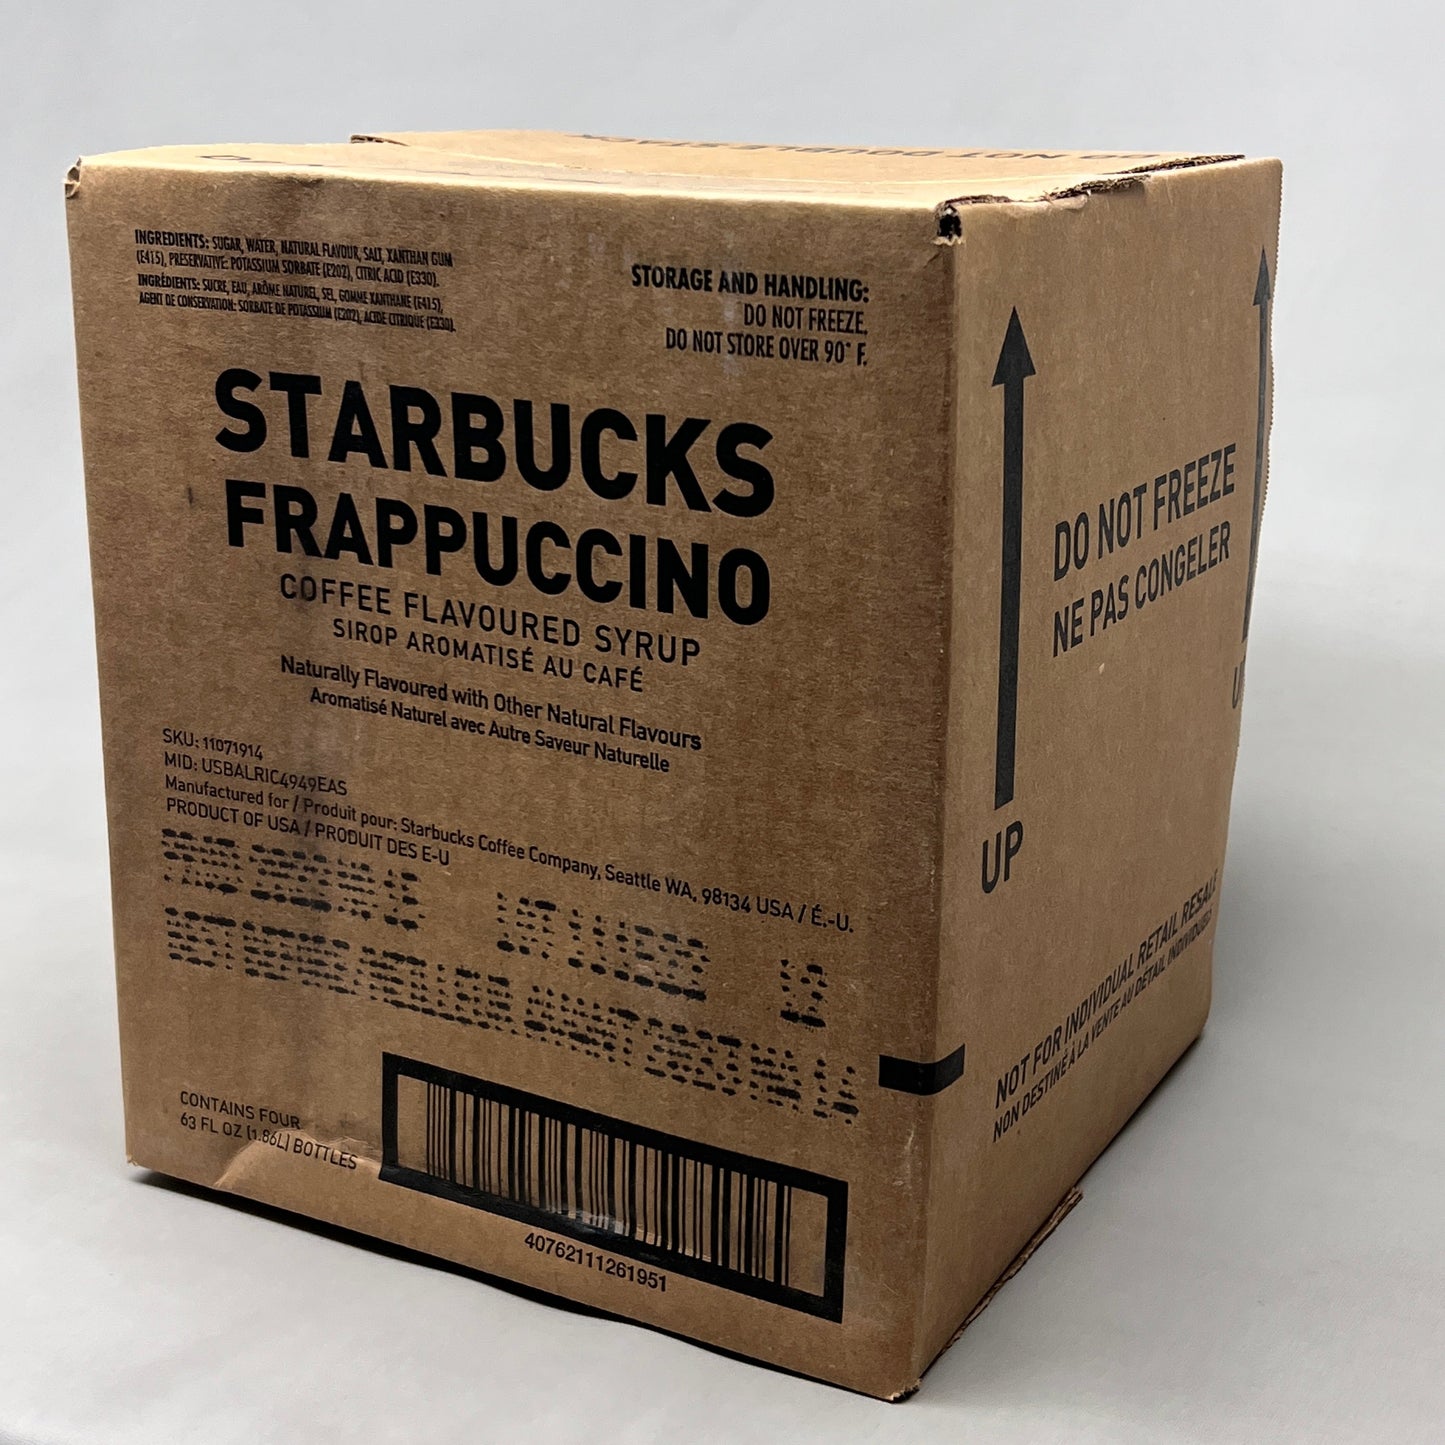 ZA@ STARBUCKS 4-PACK! Frappuccino Syrup Coffee Flavored Syrup (1.86 L/bottle) 5/23 (Expired)